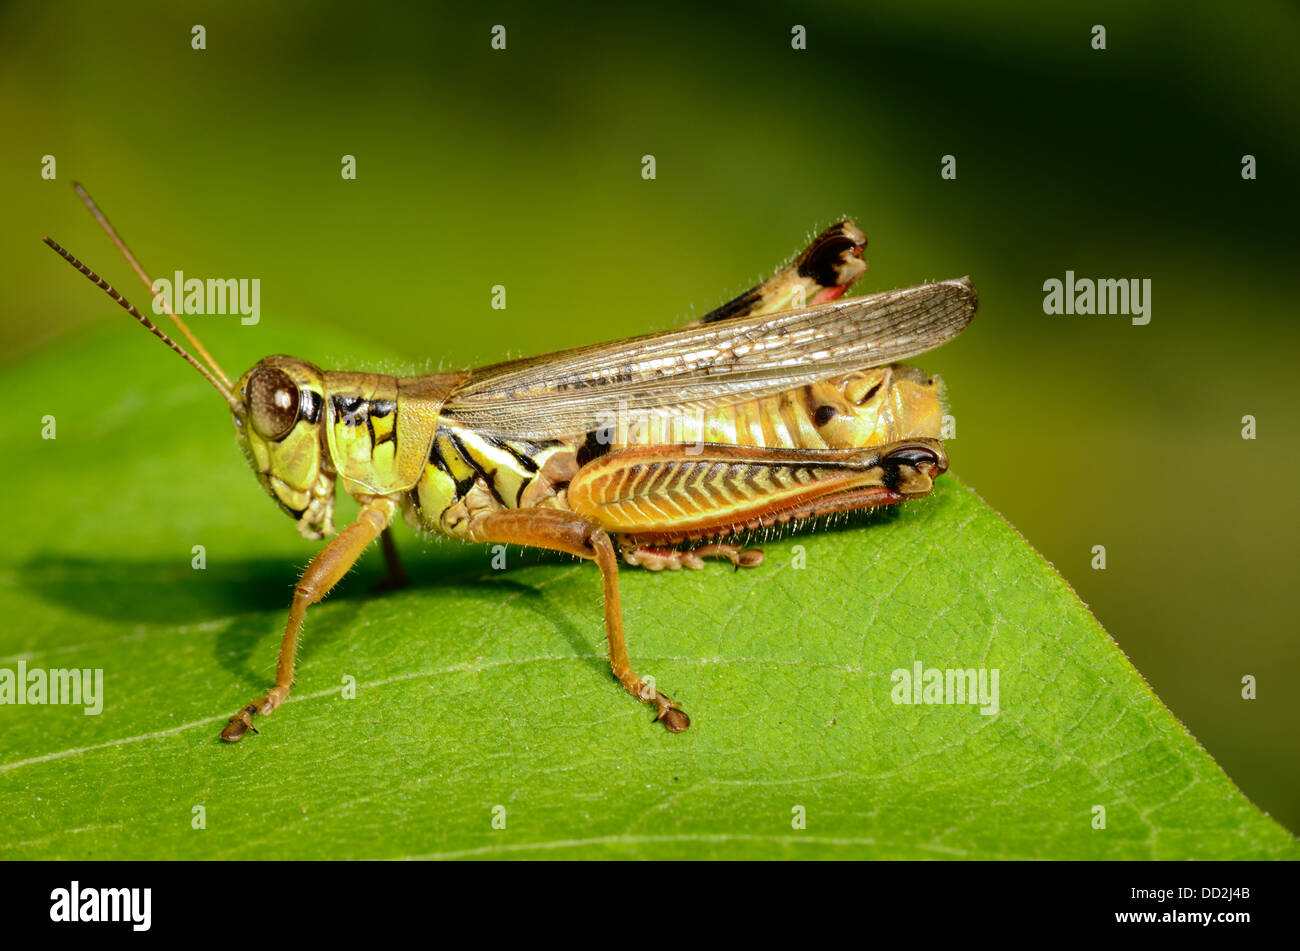 A Grasshopper perched on a green leaf. Stock Photo